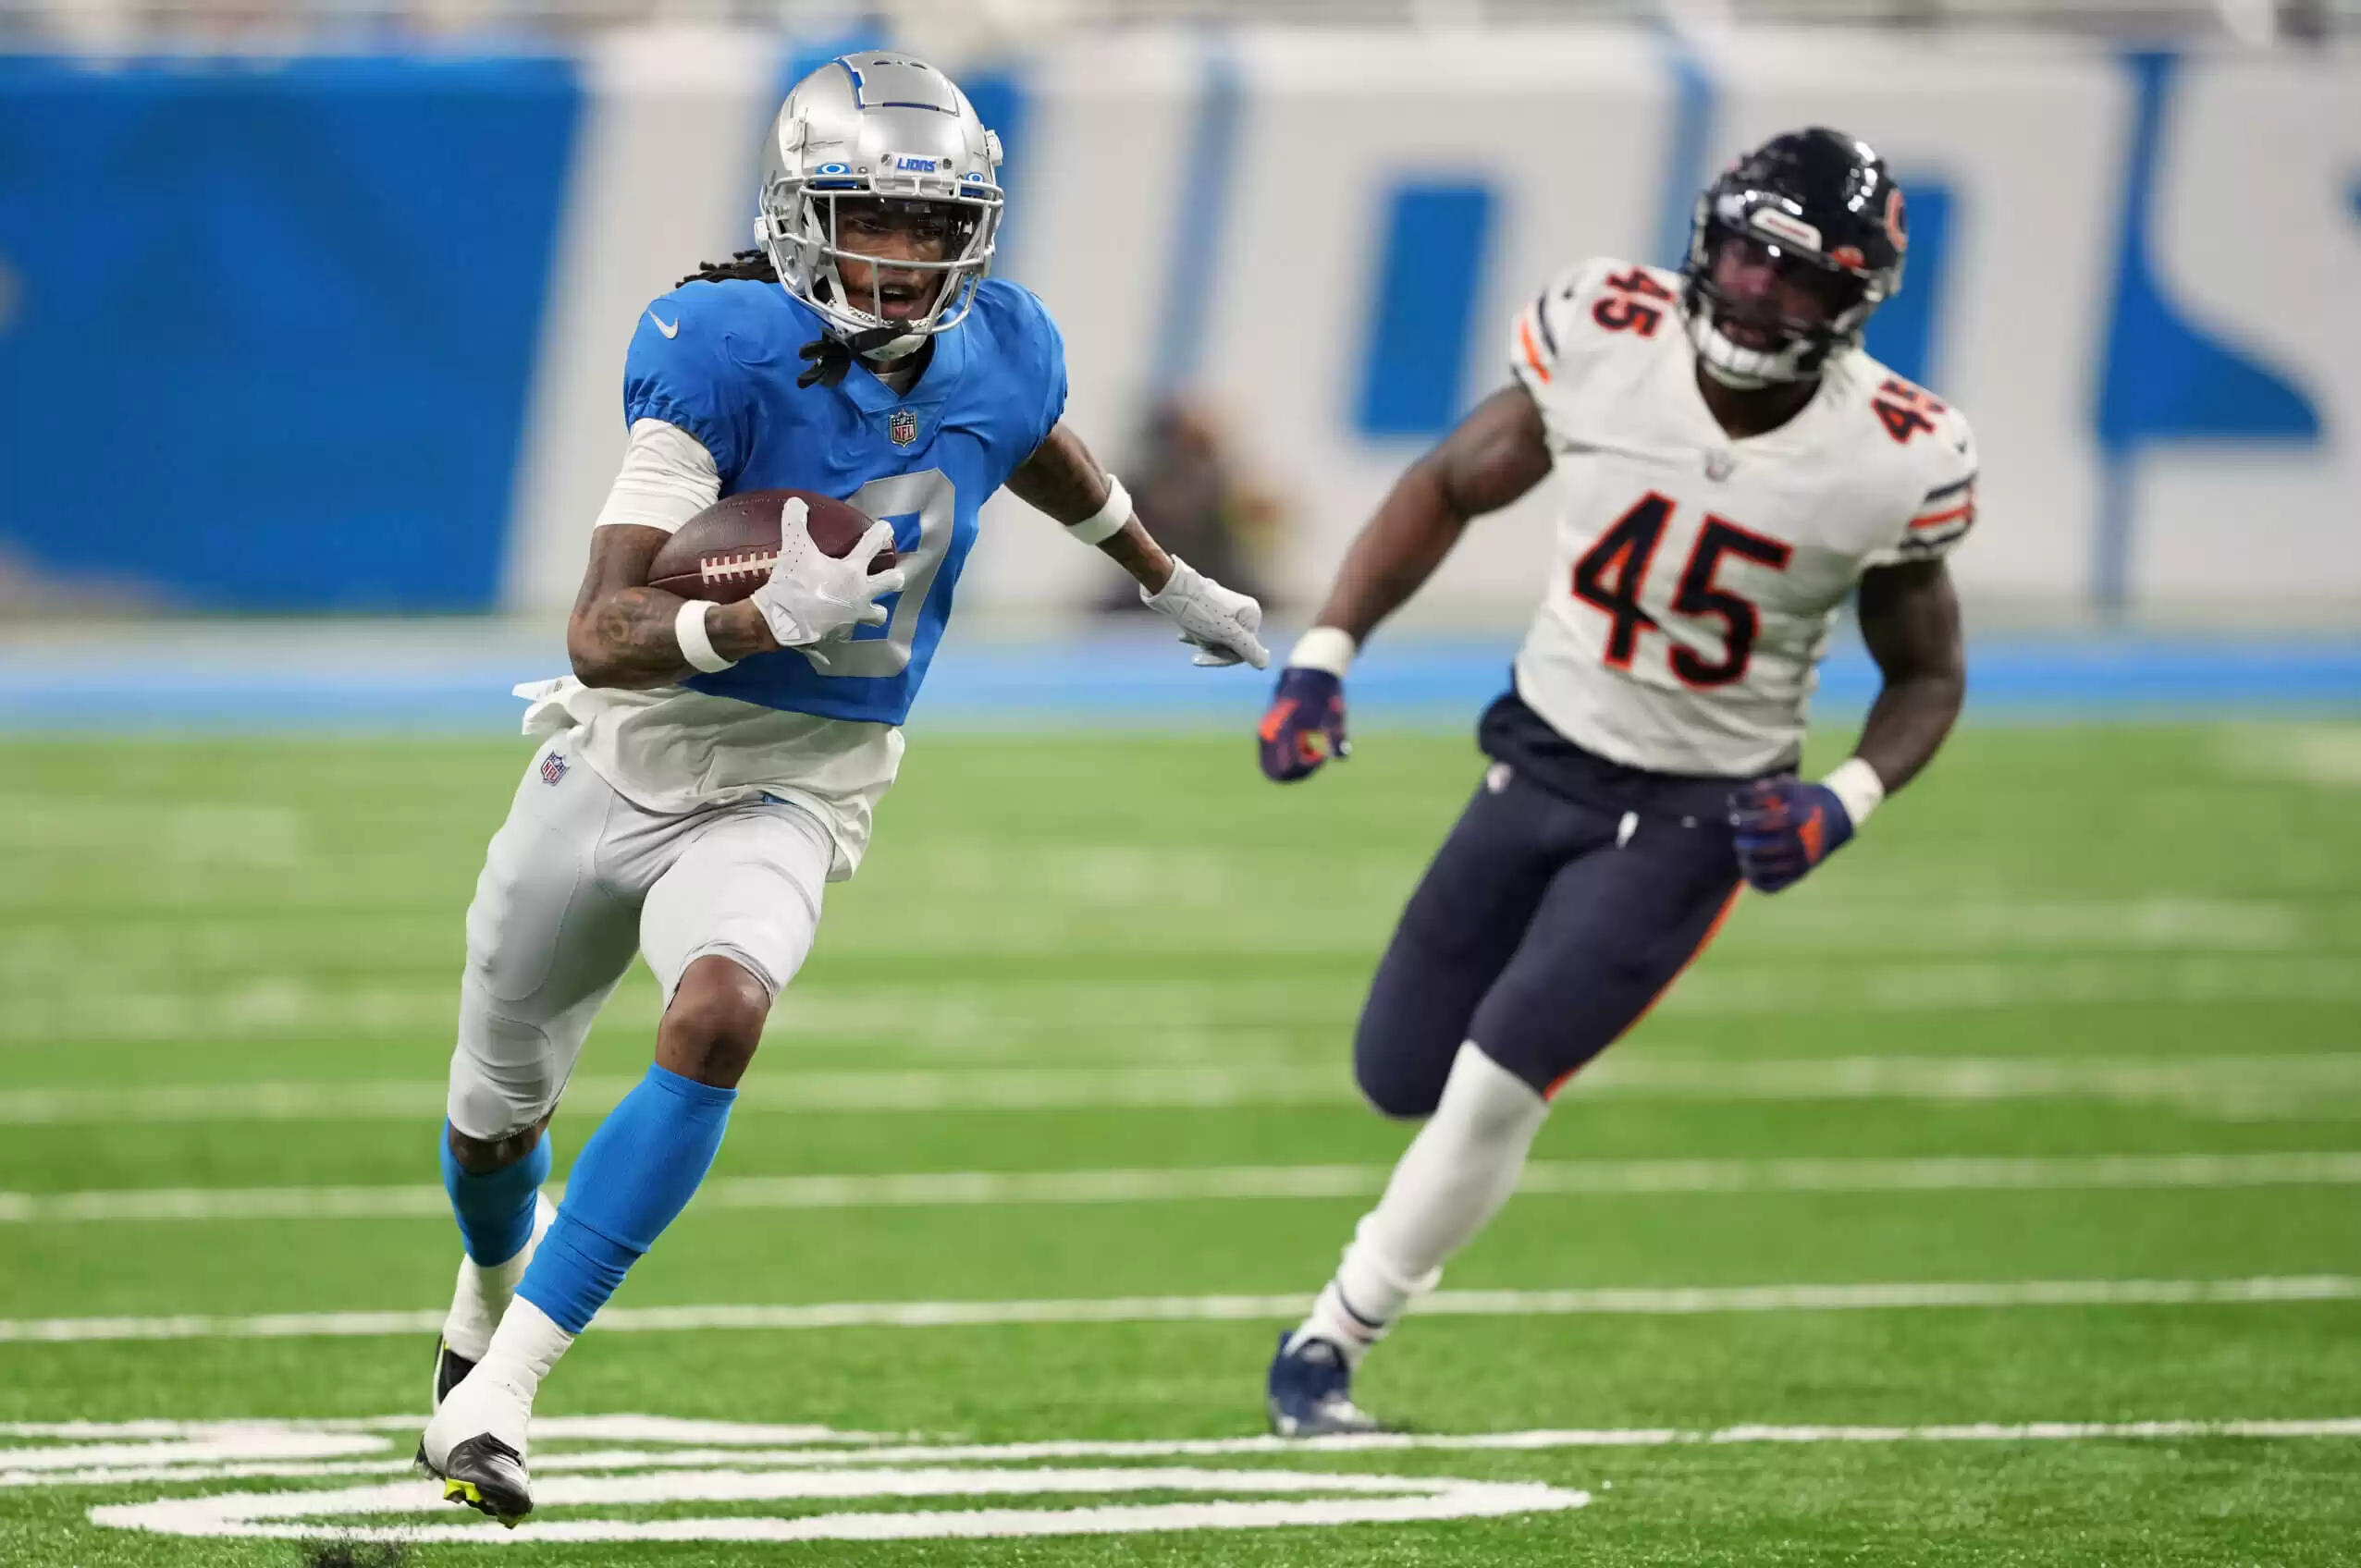 Jameson Williams returning as Lions WR post gambling suspension: Expectations